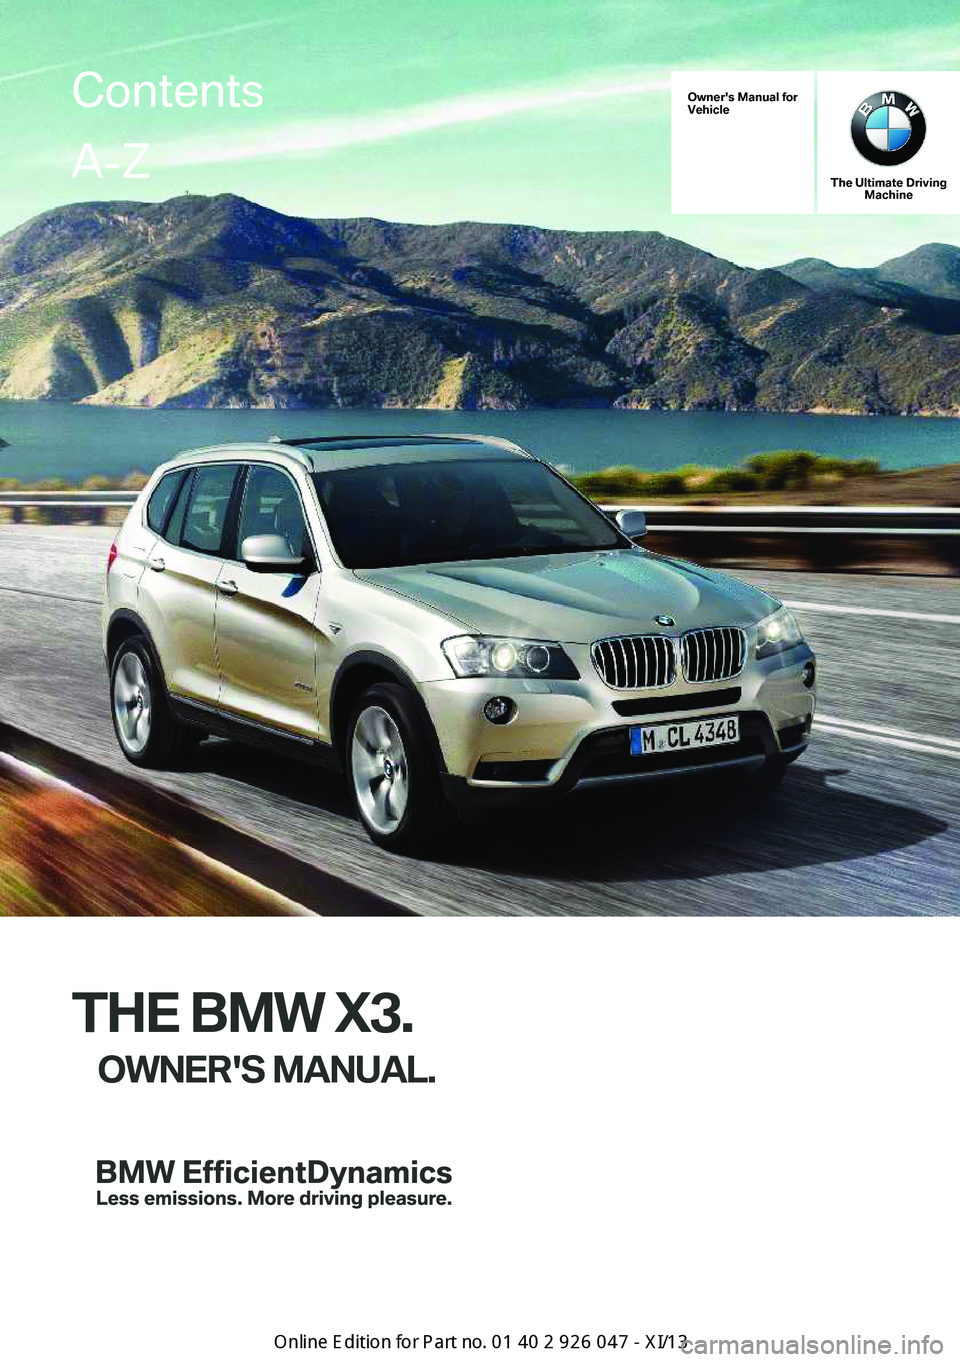 BMW X3 2013 F25 Owners Manual Owner's Manual for
Vehicle
The Ultimate Driving Machine
THE BMW X3.
OWNER'S MANUAL.
ContentsA-Z
Online Edition for Part no. 01 40 2 911 041 - VI/13   